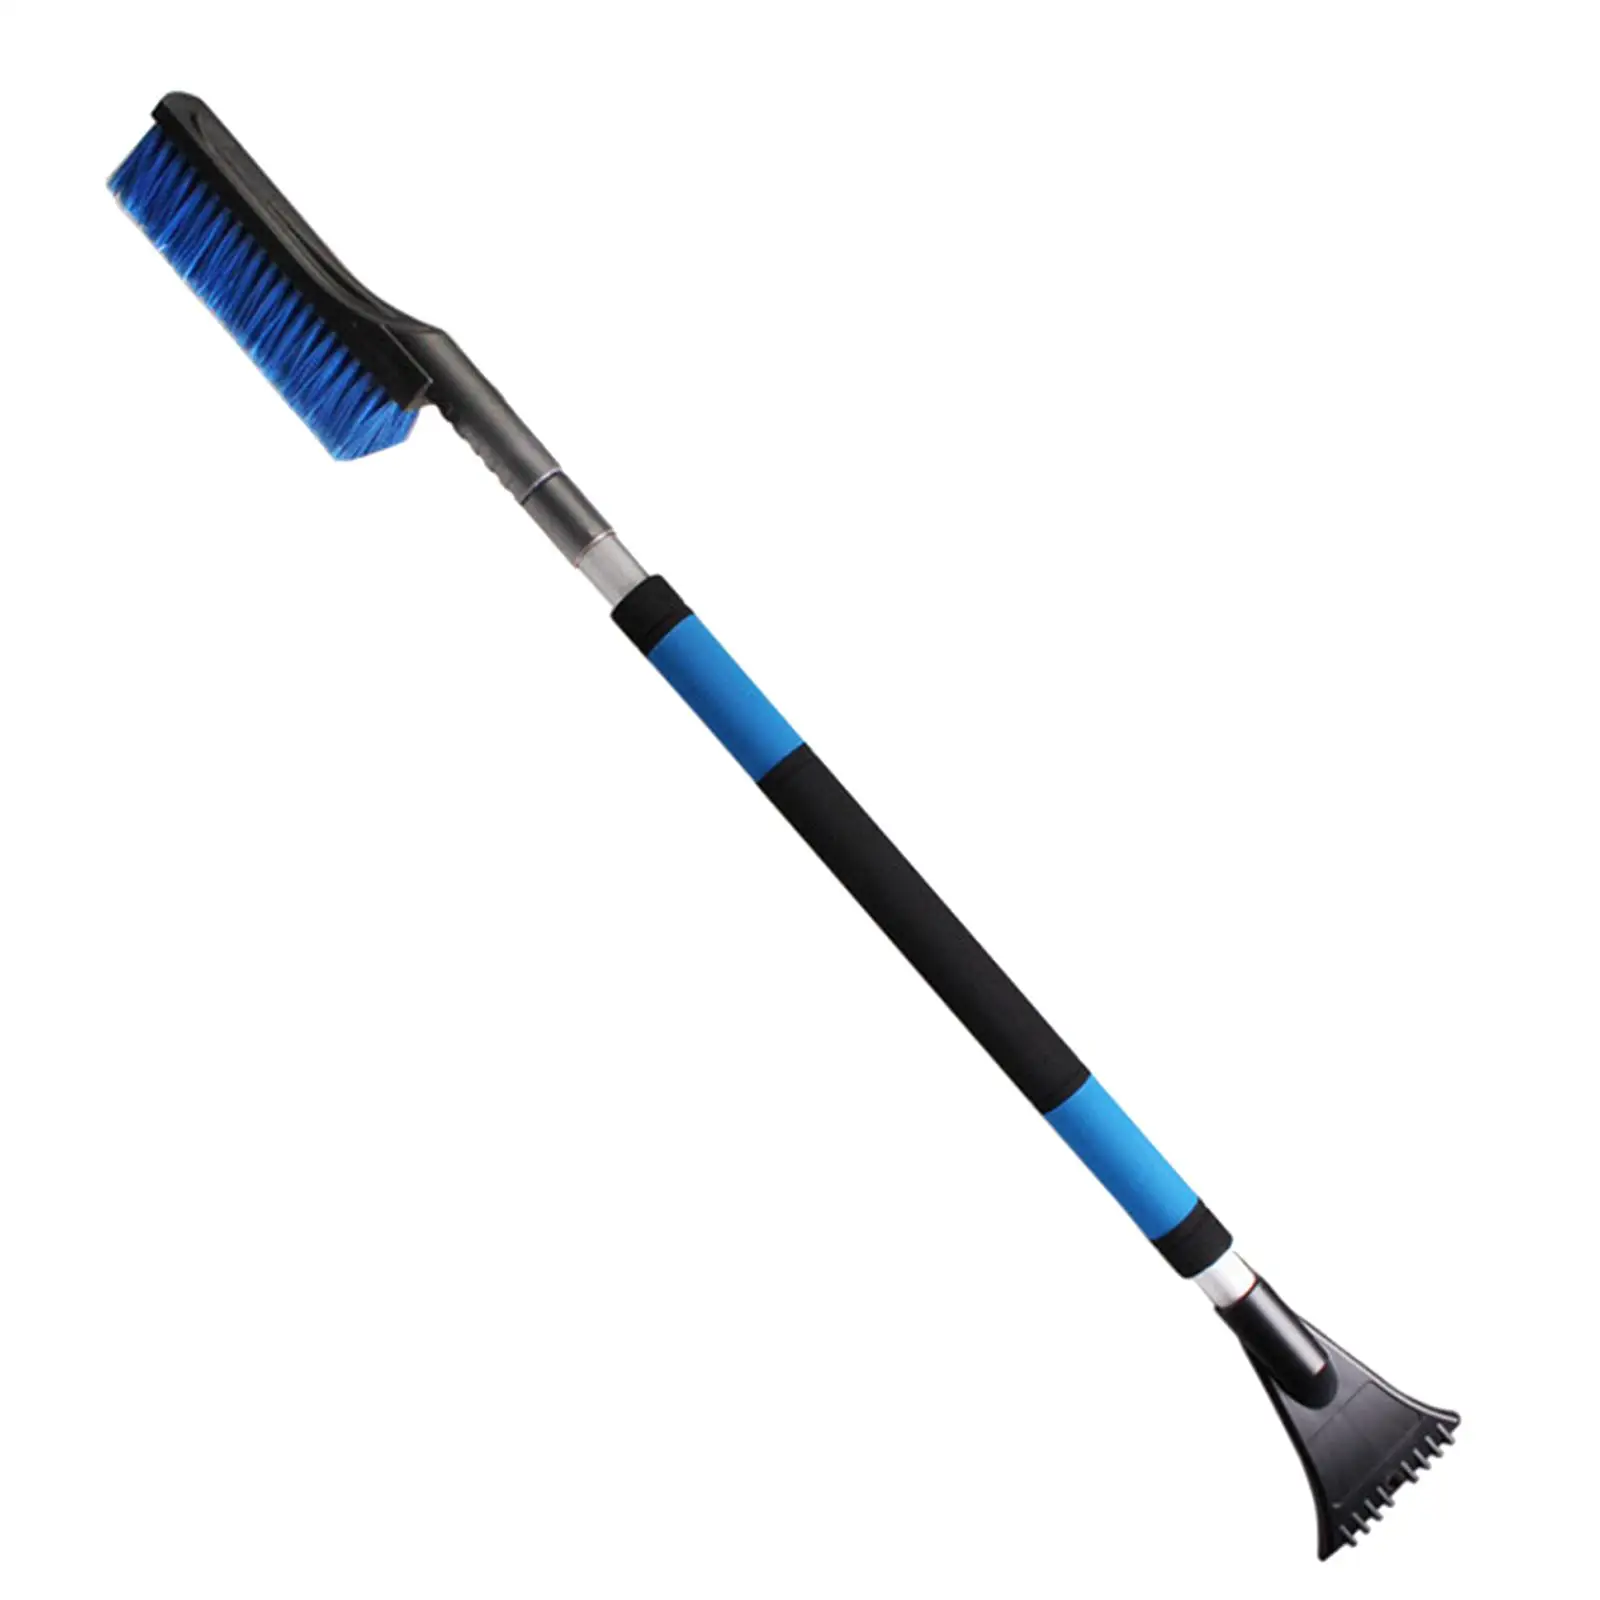 Winter Extendable Ice Scraper Snow Brush Durable ABS Material 2-In-1 Snow Removal Tool ,Extend from 100-140cm for Longer Reach